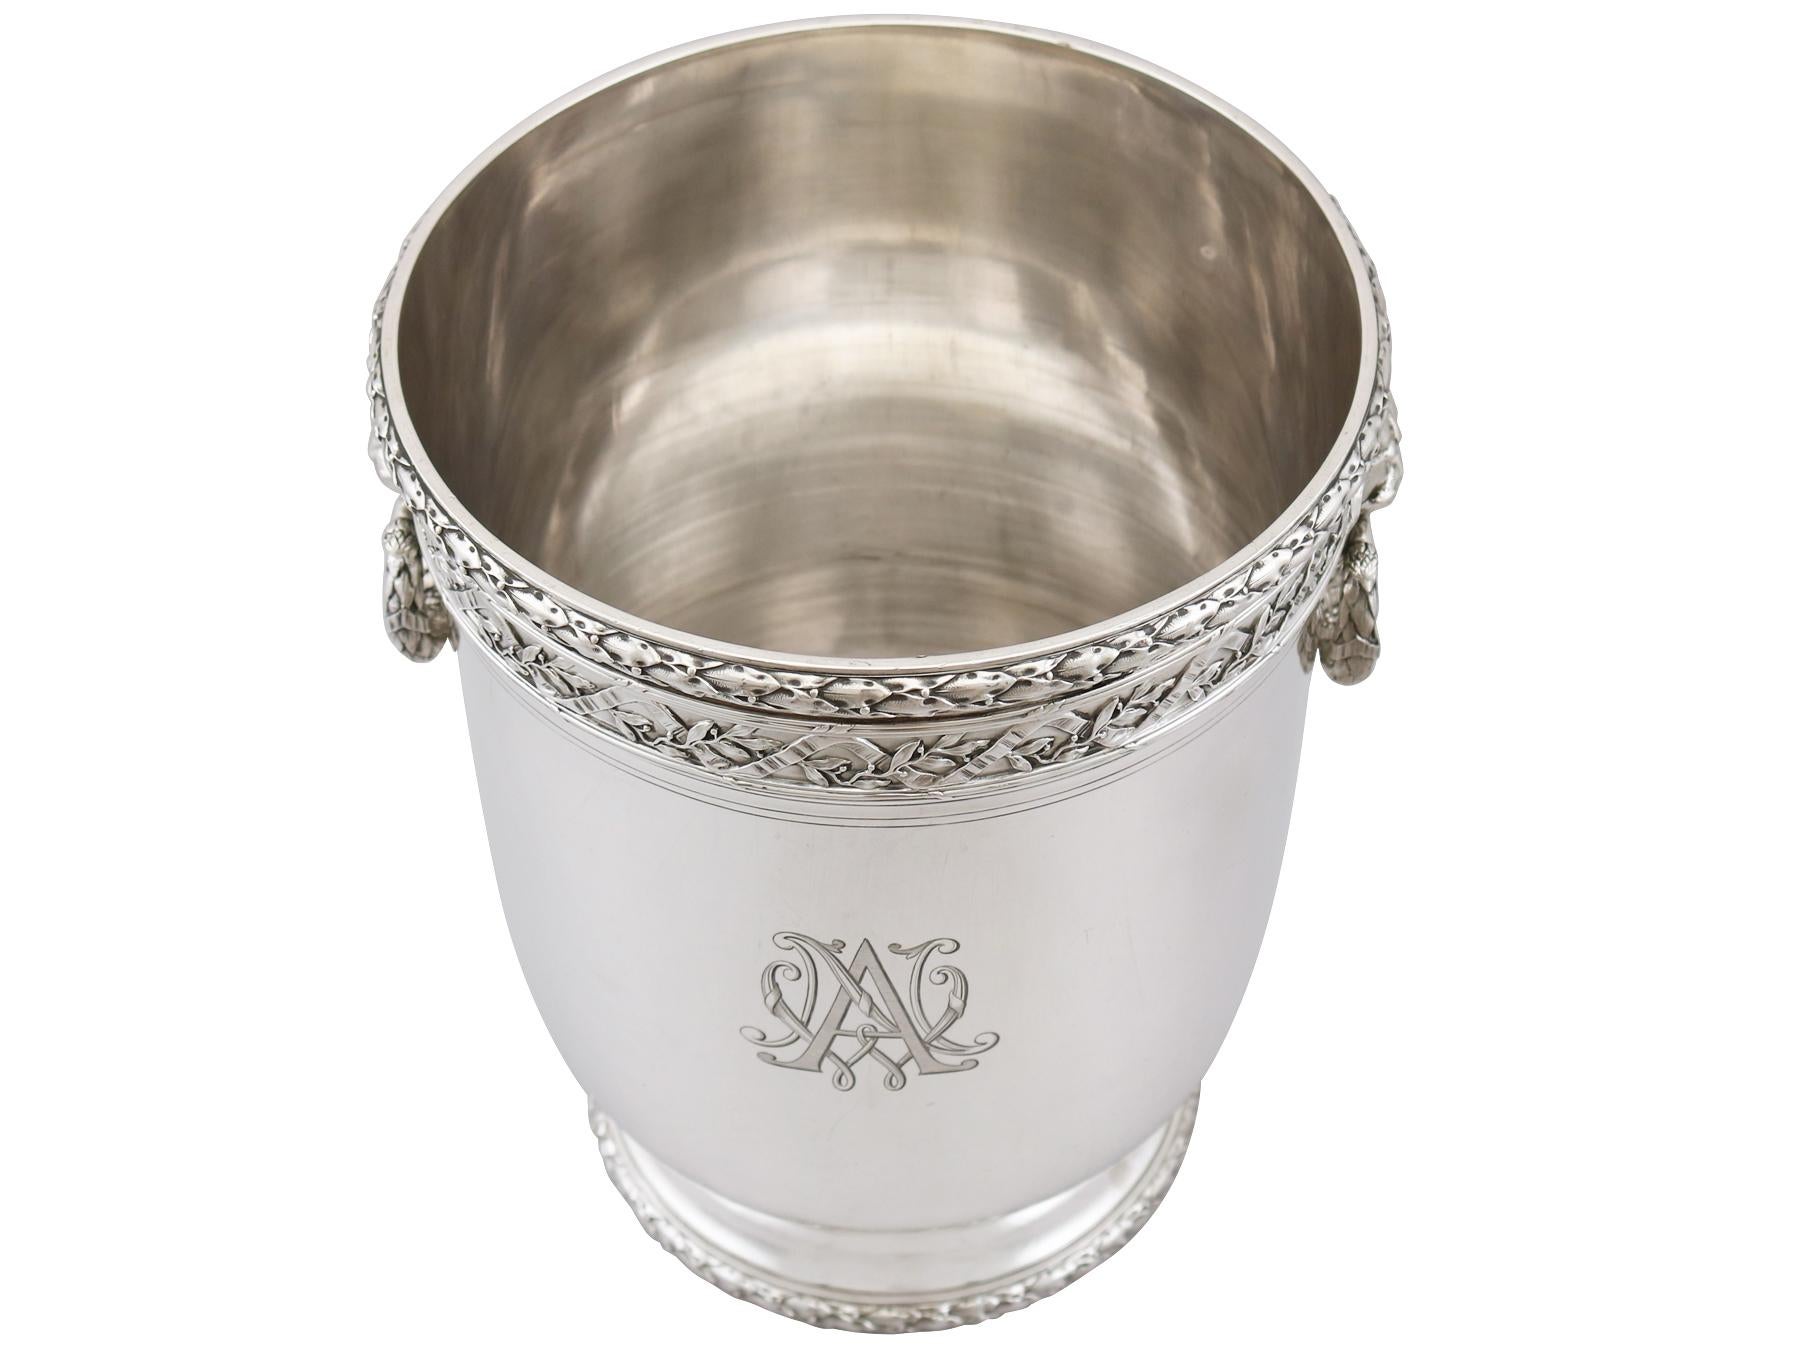 Early 20th Century Antique French Silver Wine Cooler, circa 1910